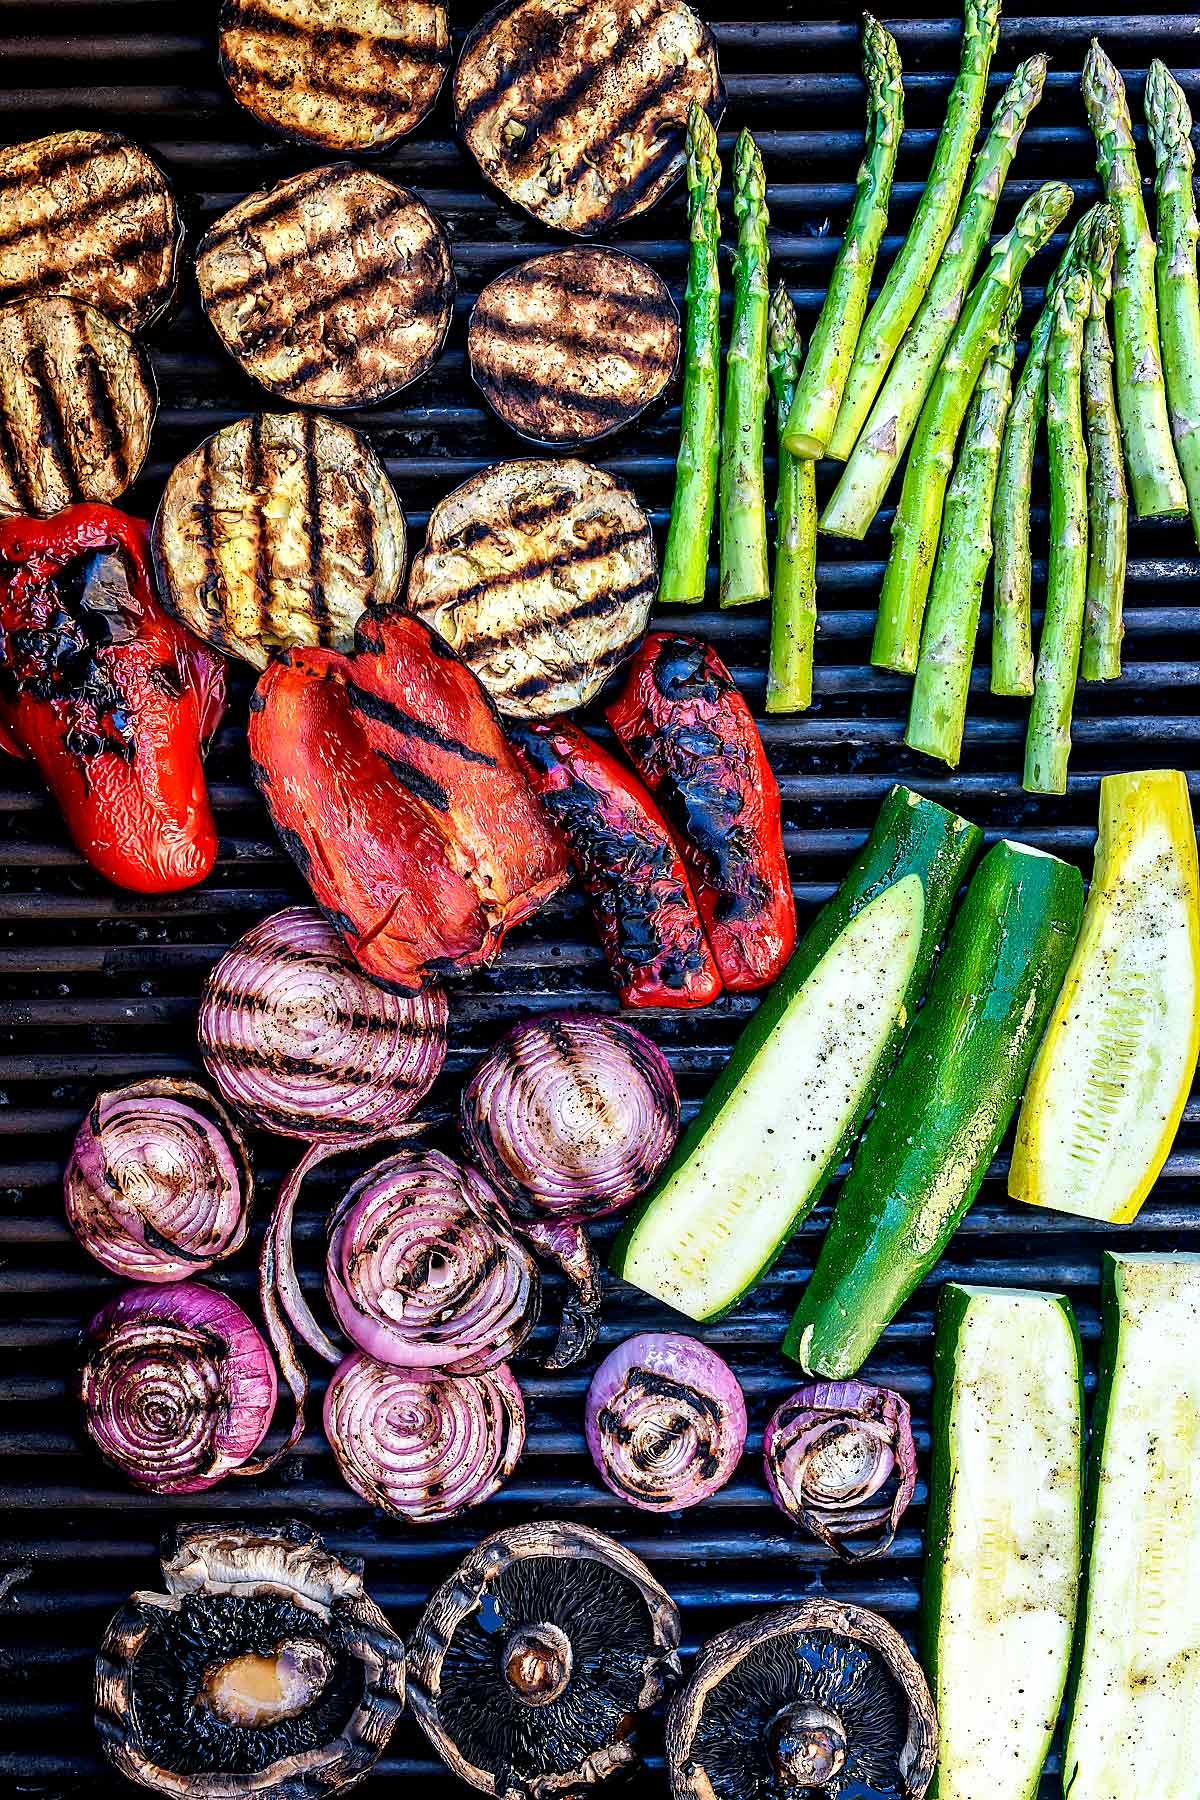 Which type of vegetable is not good for grilling